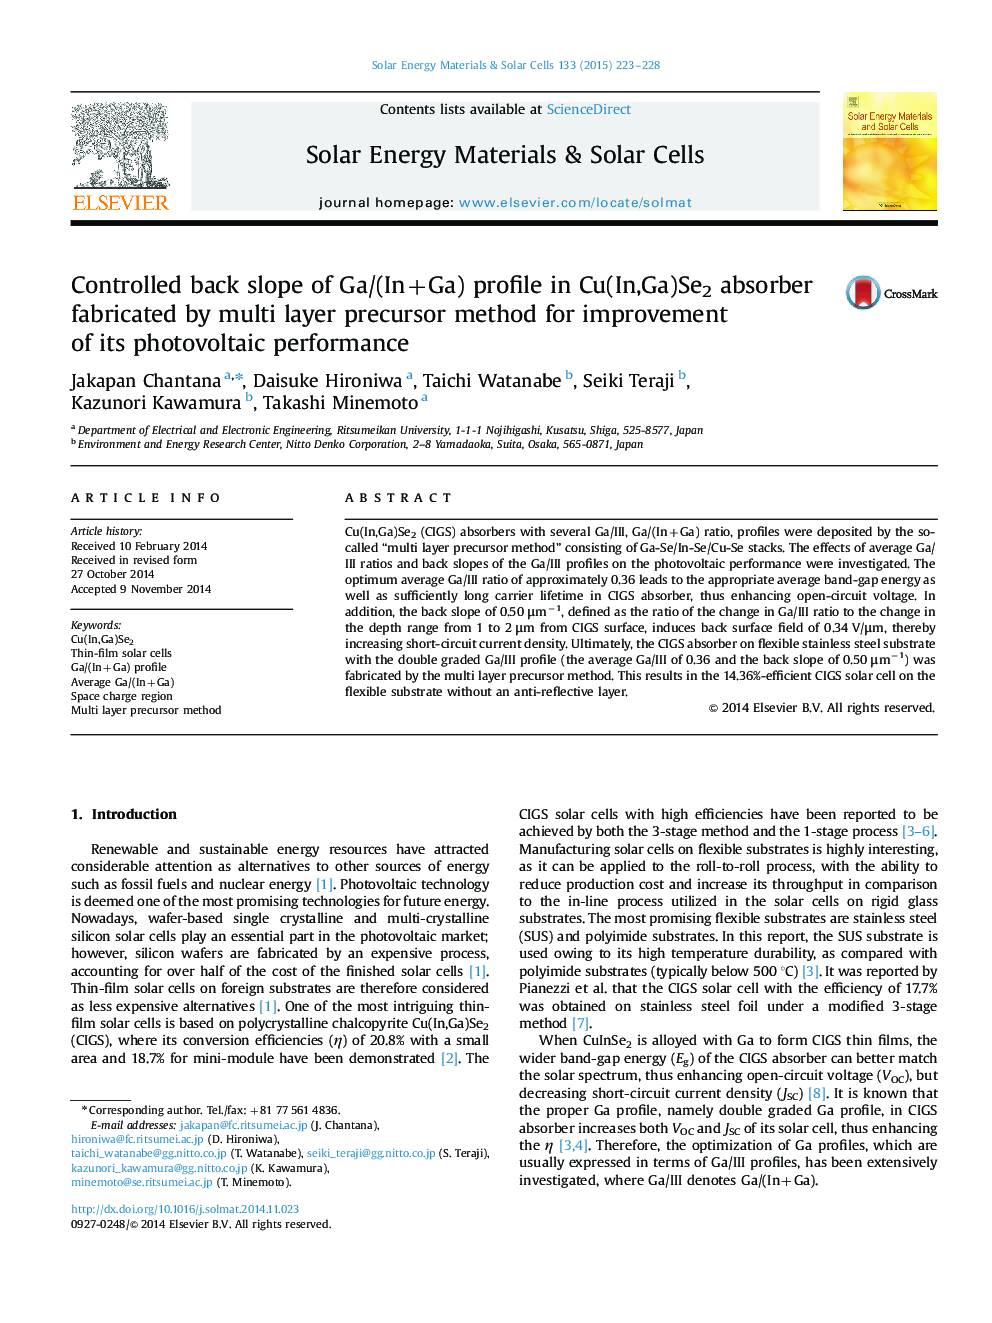 Controlled back slope of Ga/(In+Ga) profile in Cu(In,Ga)Se2 absorber fabricated by multi layer precursor method for improvement of its photovoltaic performance